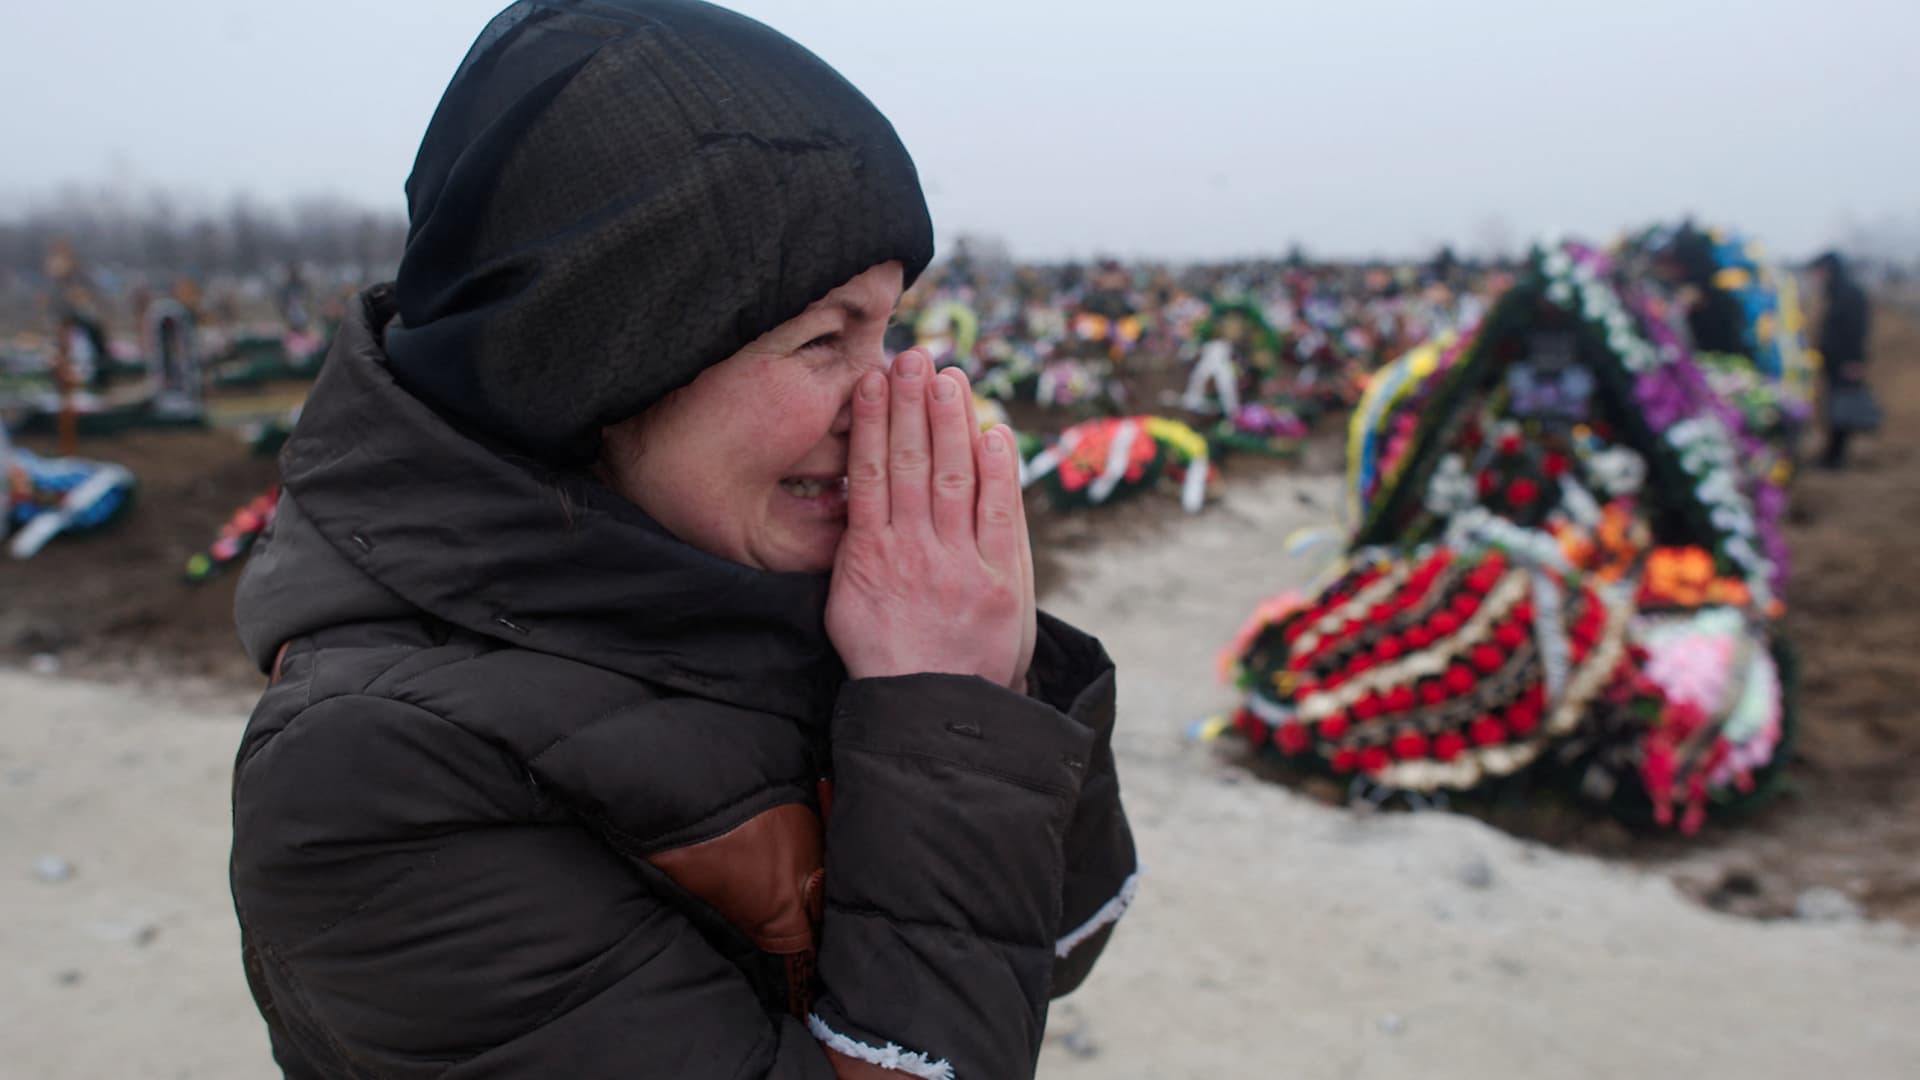 FILE PHOTO: A relative of a victim of recent shelling reacts at a cemetery in Mariupol, a city along the coast of the Sea of Azov, Ukraine January 27, 2015. Germany's foreign minister hinted at further sanctions on Russia on Monday, saying the European Union would have to react if pro-Russian separatists launched a broad offensive on the east Ukrainian port city of Mariupol. 